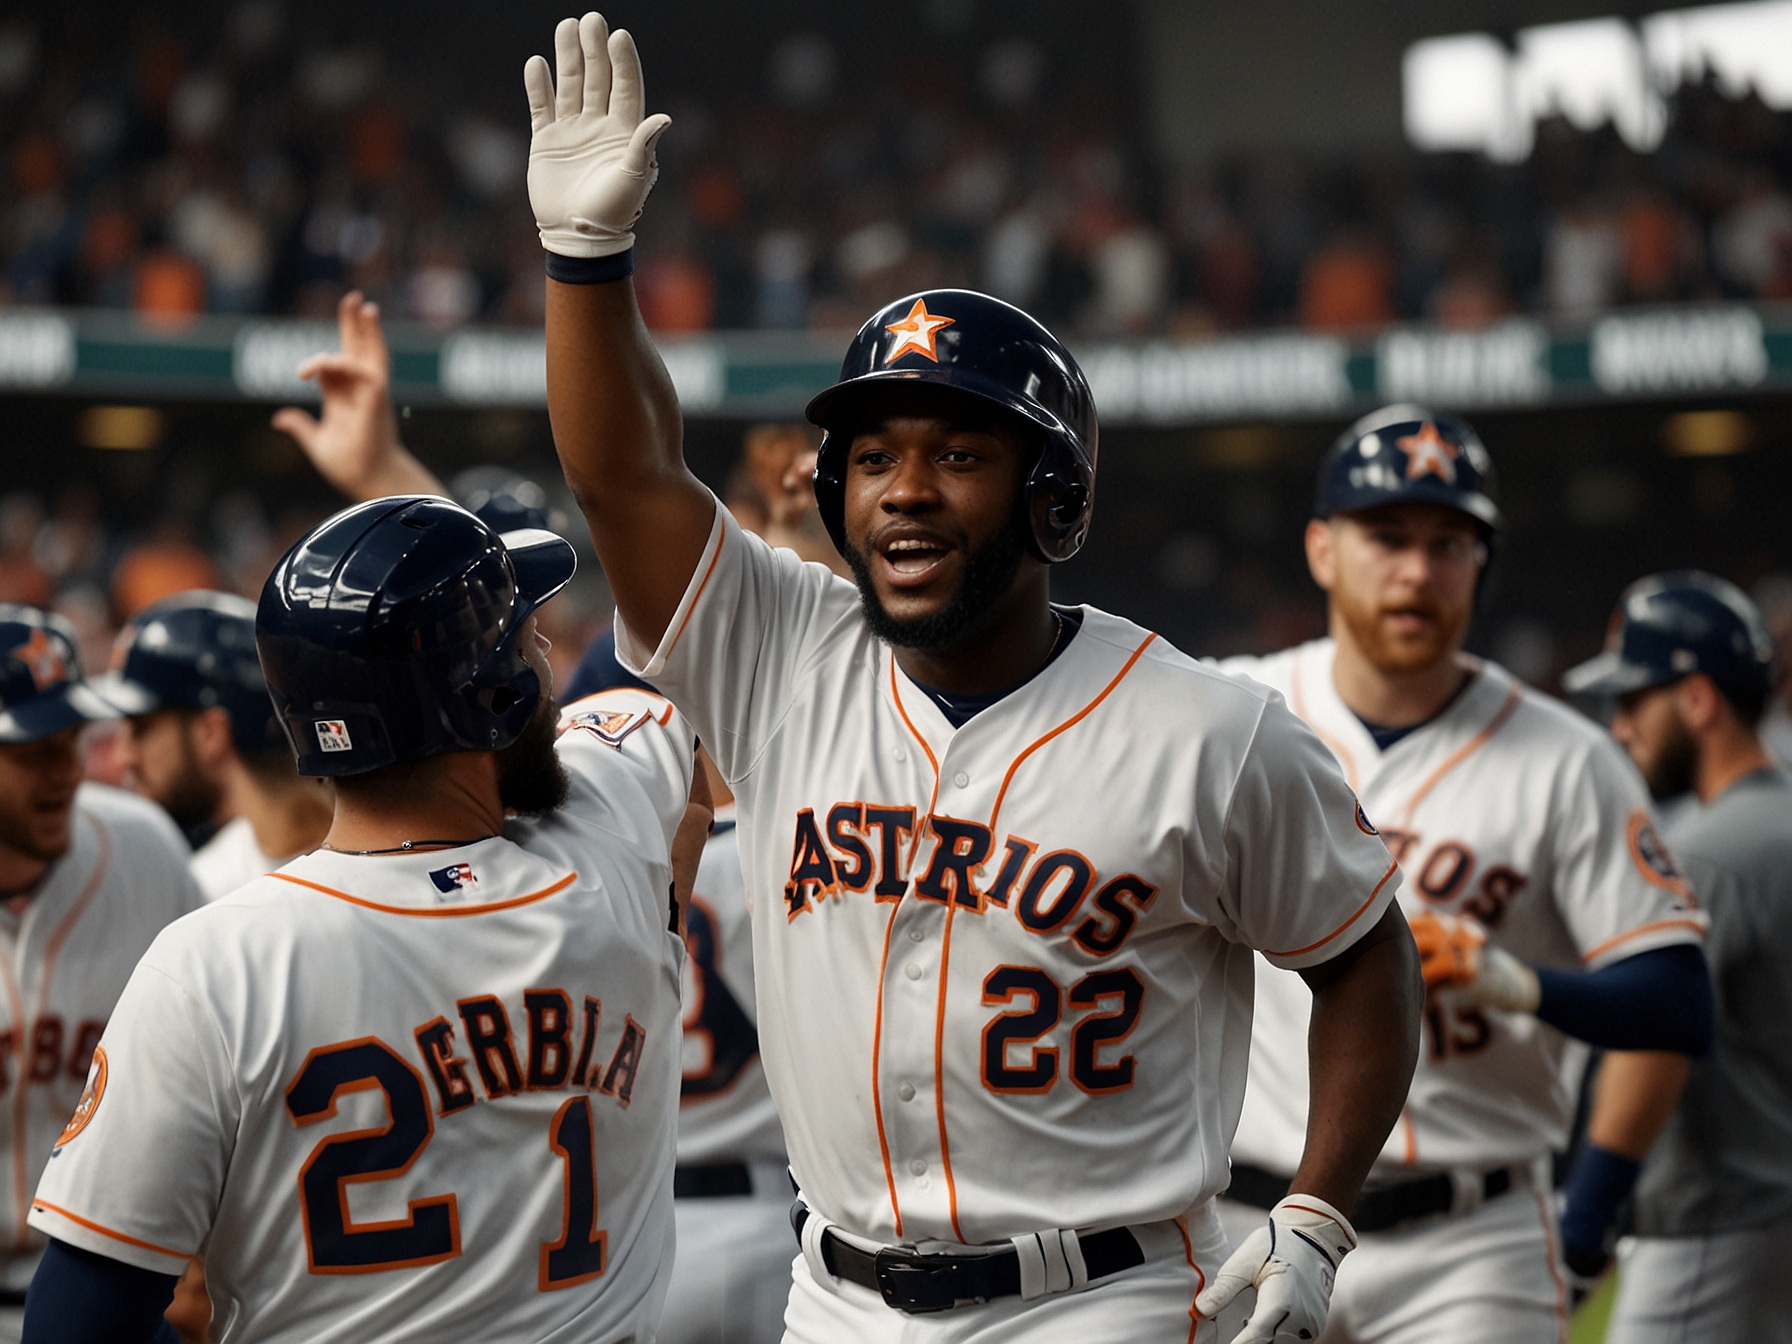 Yordan Alvarez celebrates with his teammates after hitting a home run during the first inning, setting the tone for the Astros' victory against the White Sox.